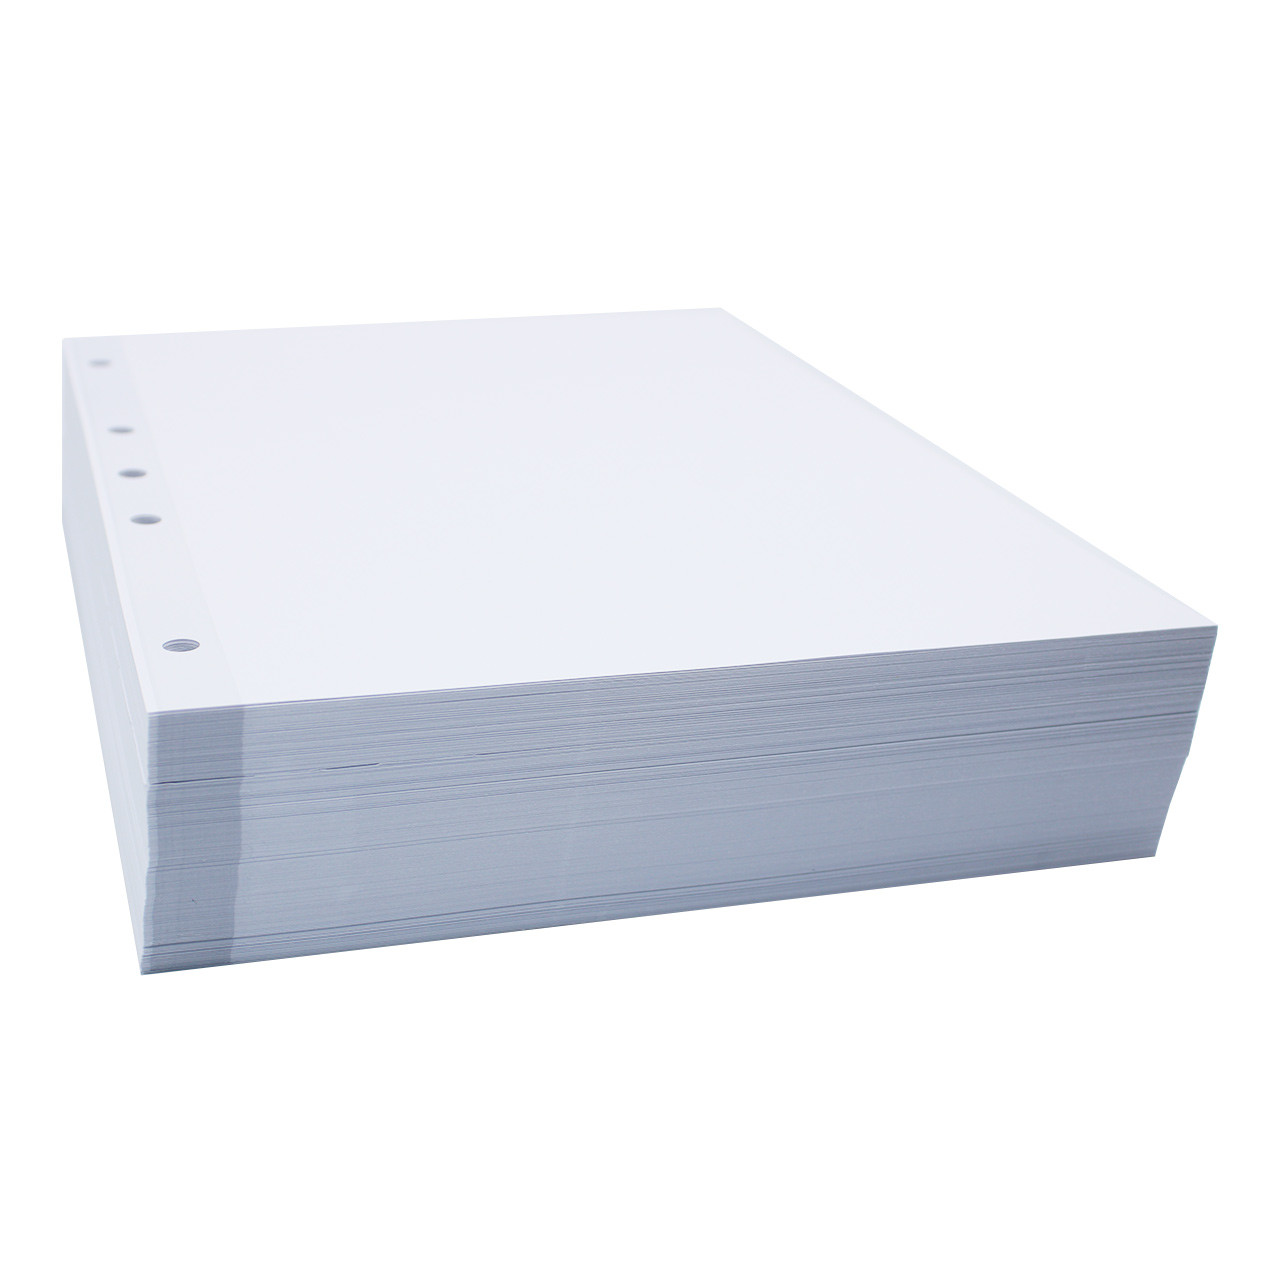 3-Hole Punched Paper 8.5(B.E.) x 5.5